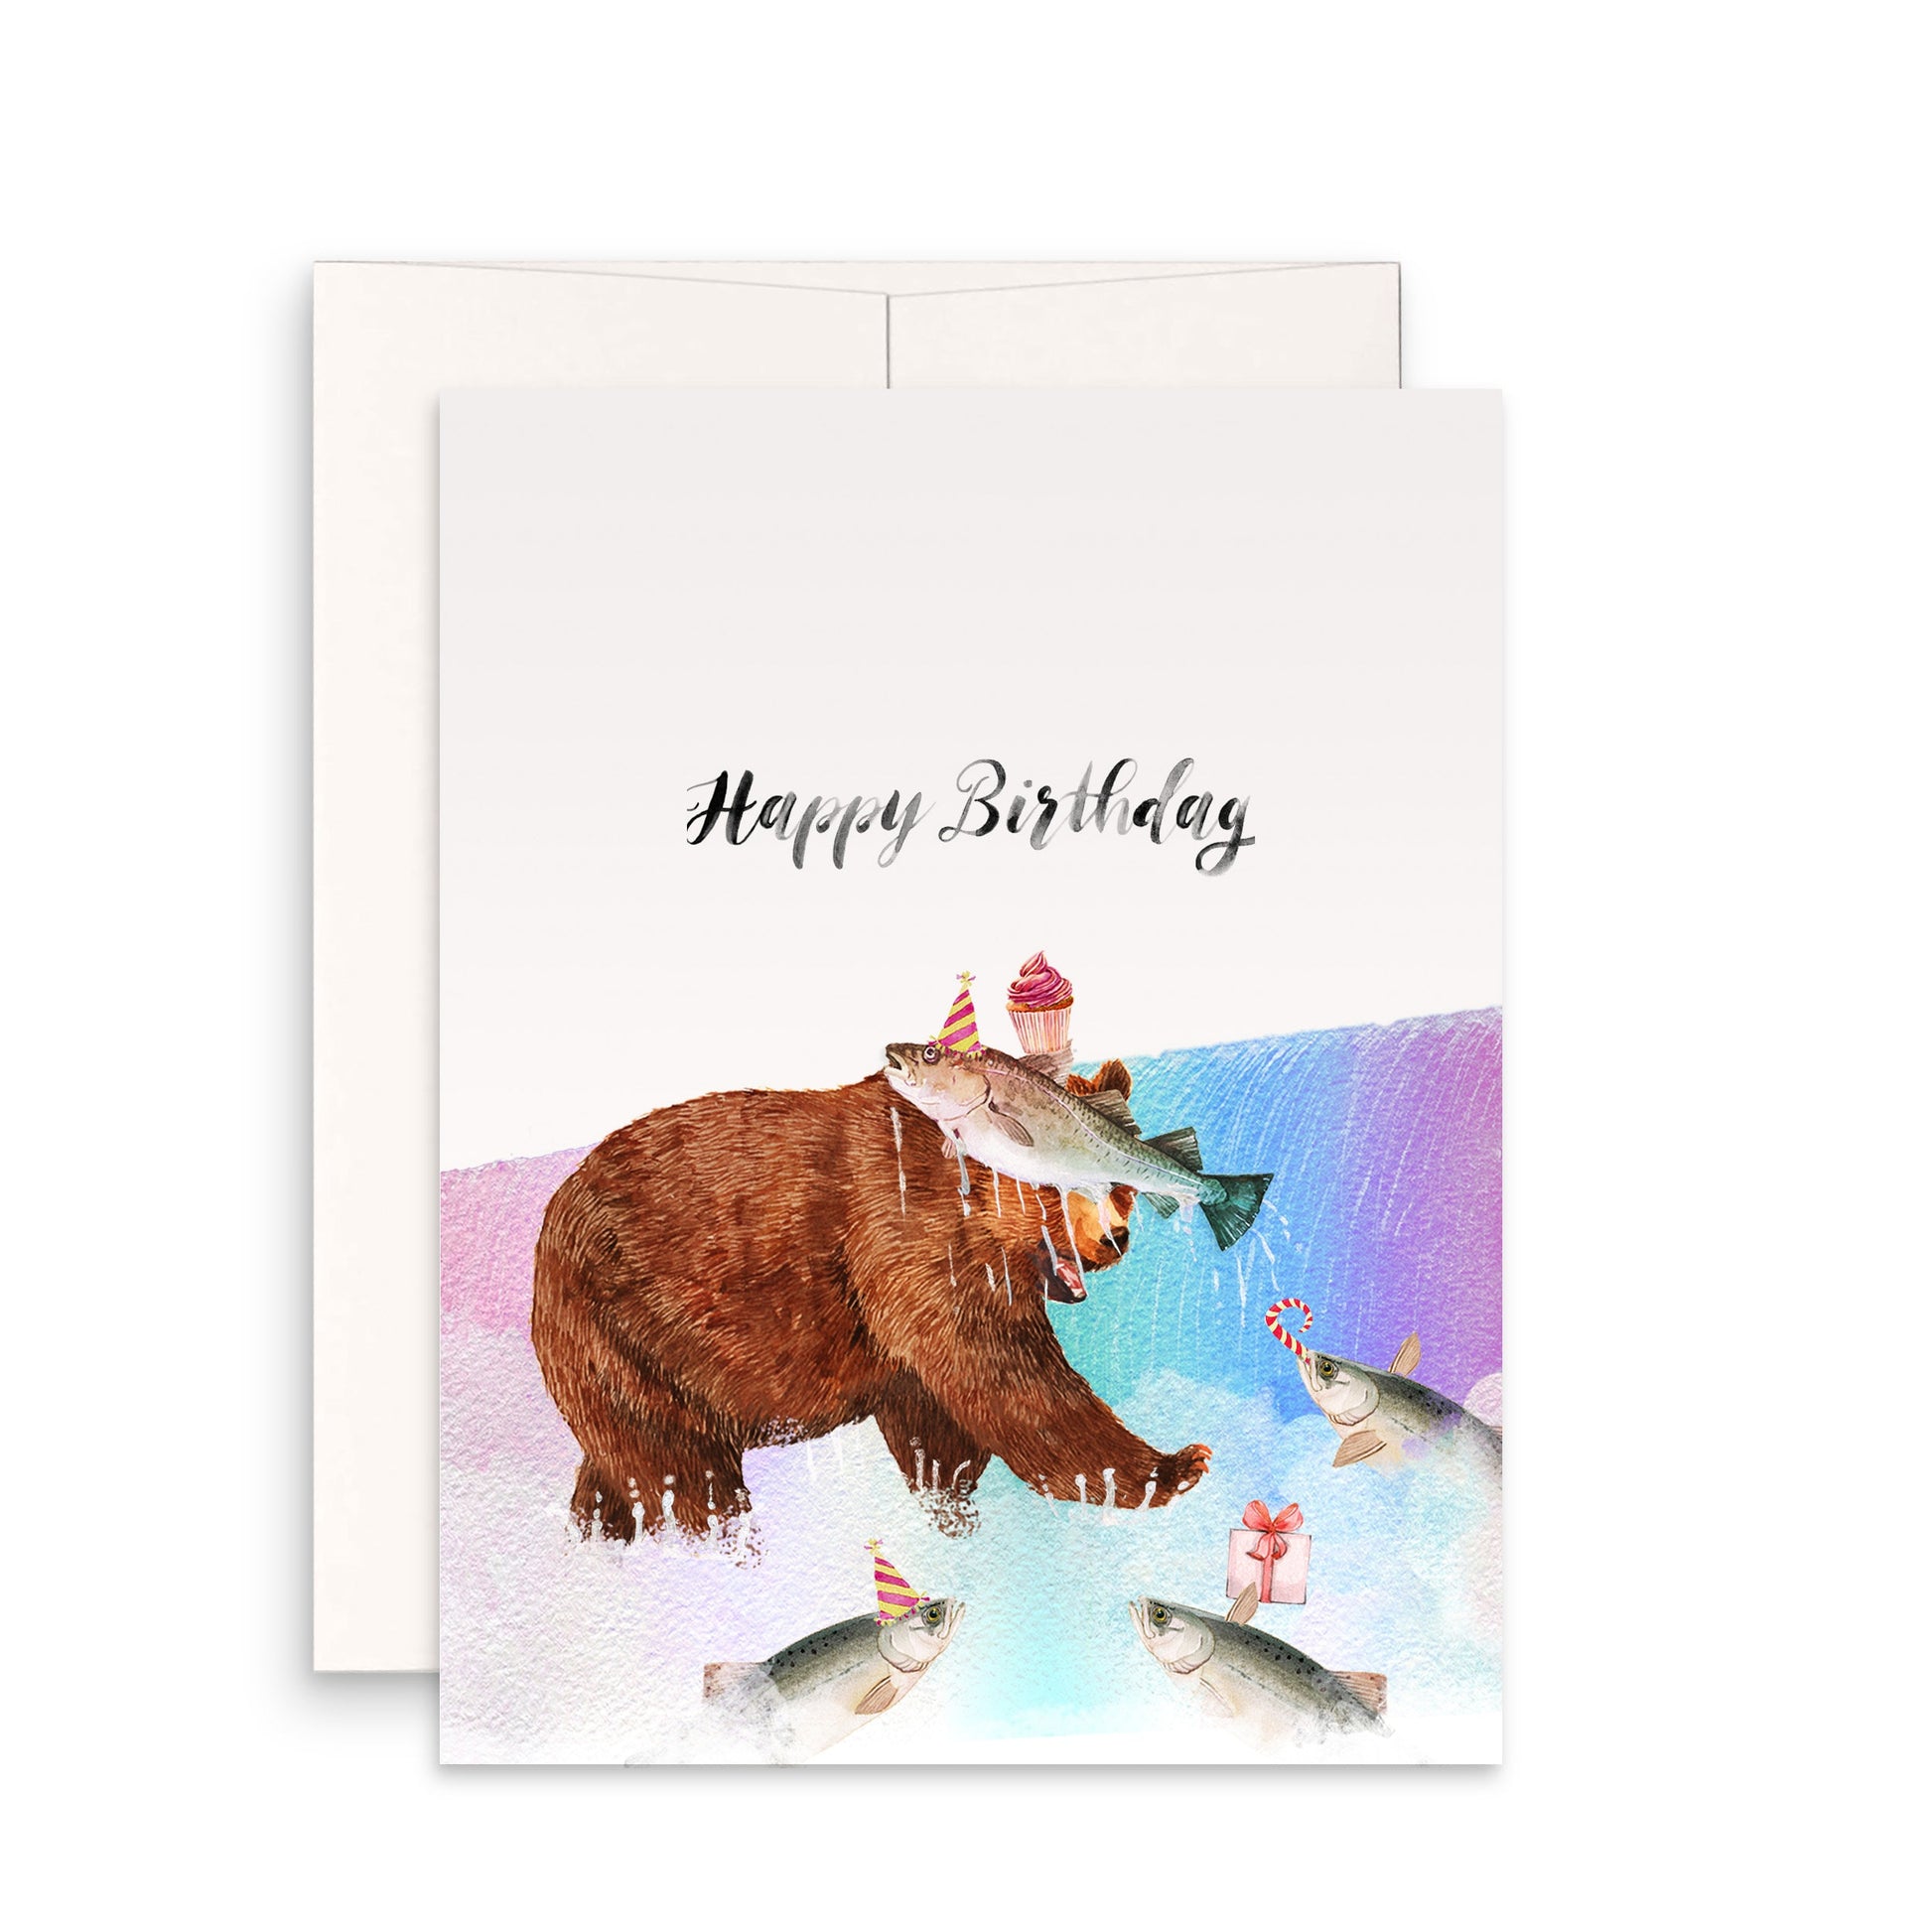 Grizzly Bear Funny Birthday Cards For Boyfriend - Salmon Fish Fly